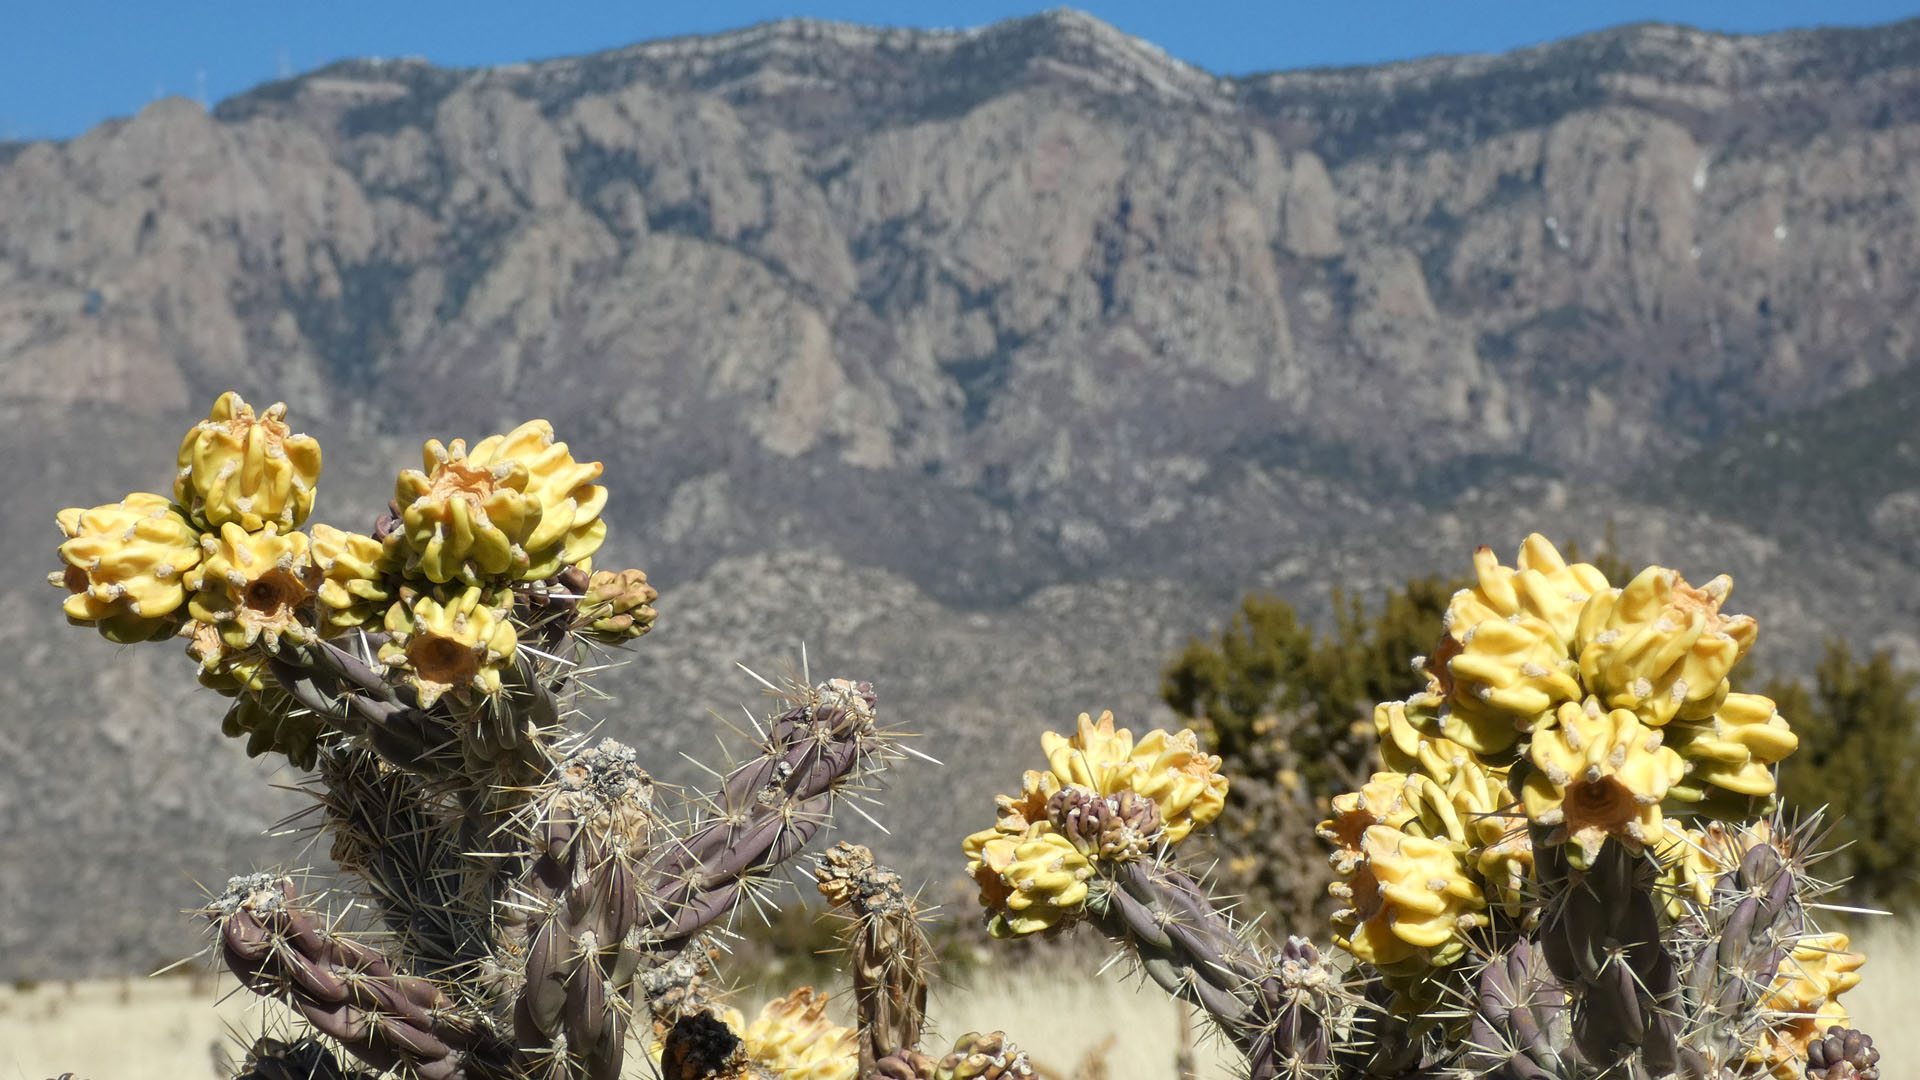 Sandia Mountains west foothills, February 2022